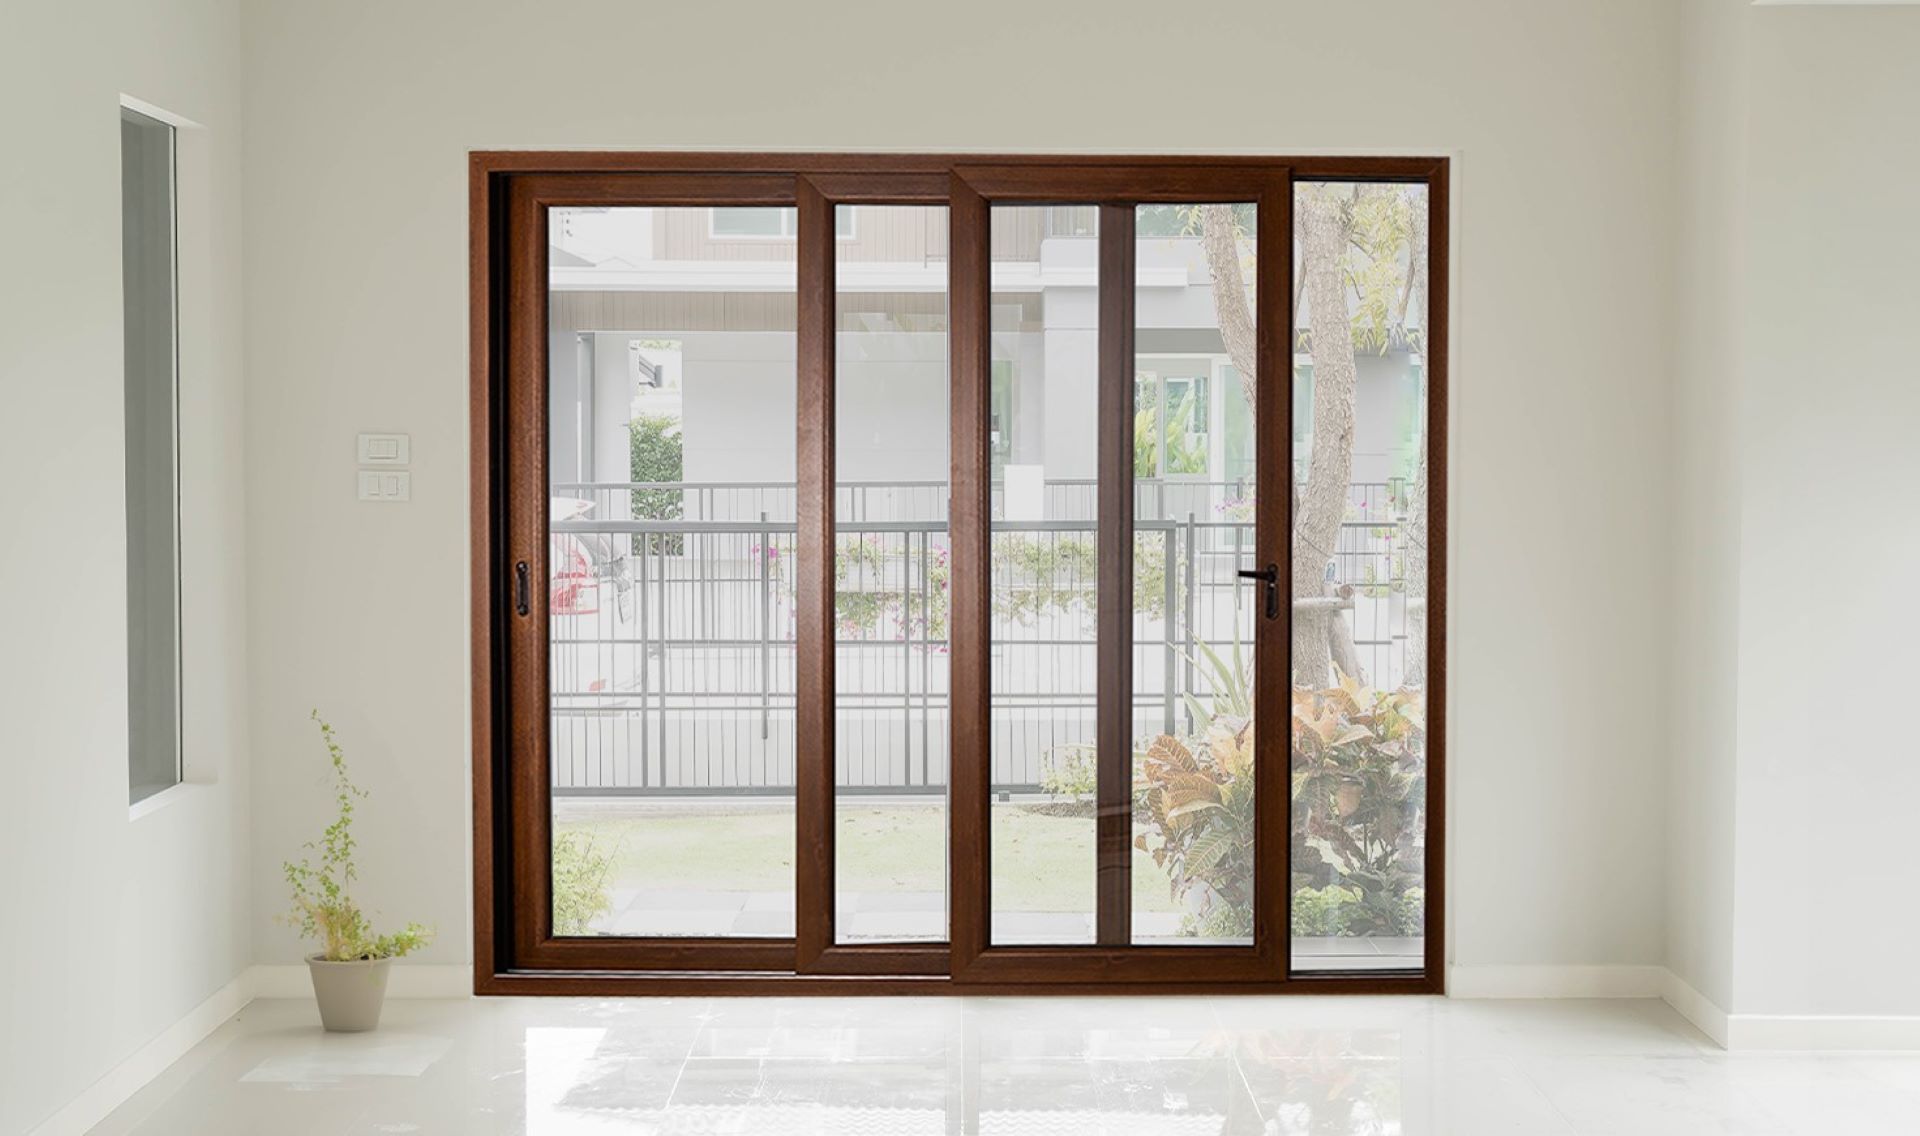 Wood-grain finish UPVC sliding doors against a white wall, blending classic elegance with modern functionality.